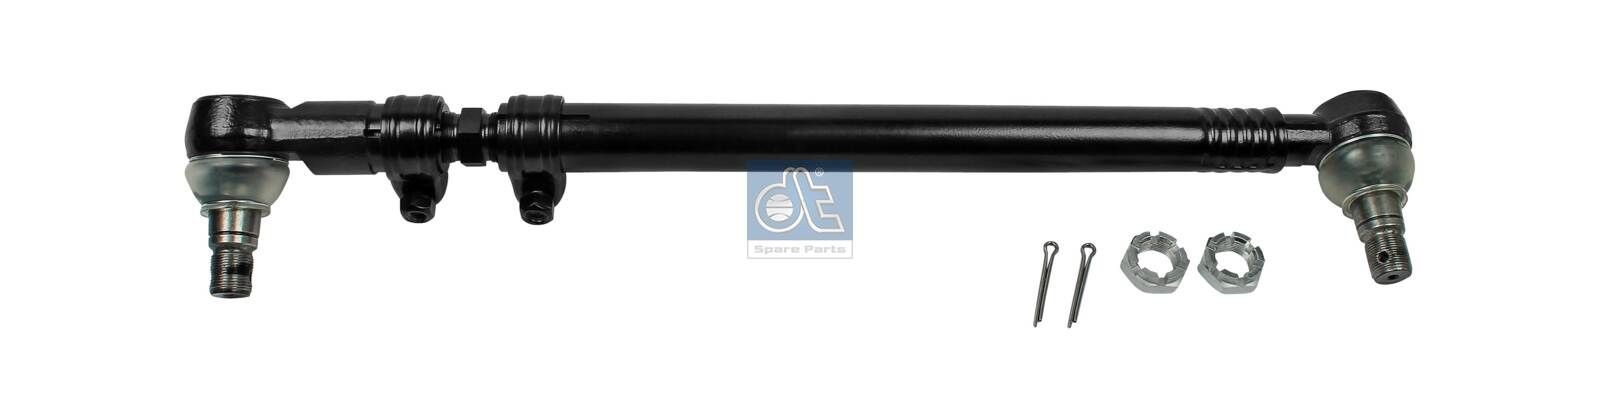 DT Spare Parts 4.65666 Rod Assembly 8226328000C